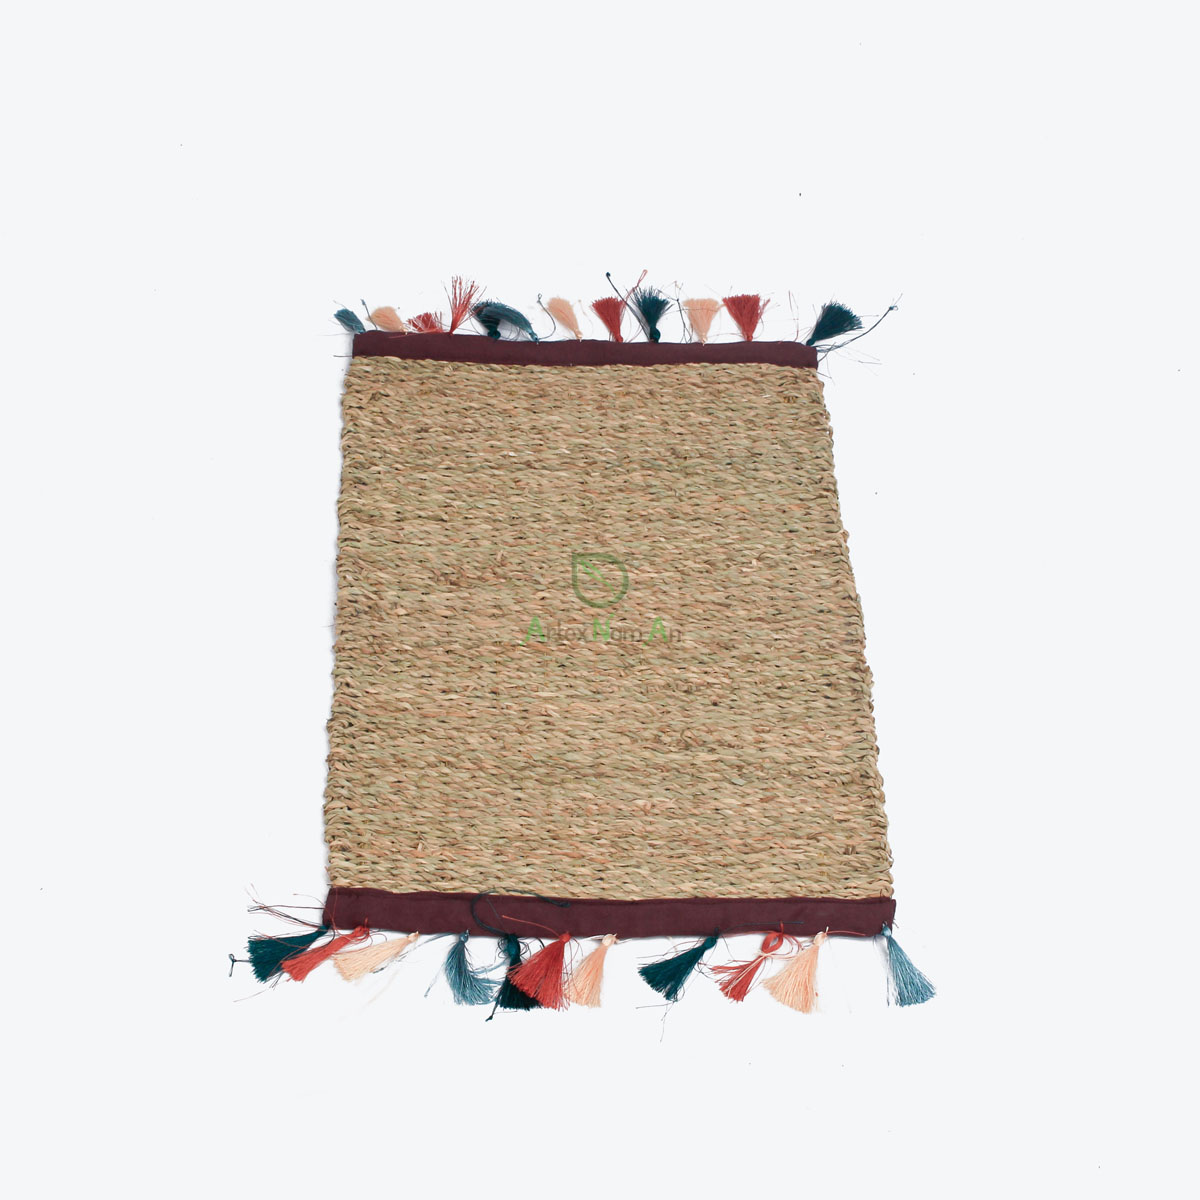 Small Rectangular Seagrass Rugs Carpets Living Room Also Woven Mat Floor Kitchen SG 06 12 006 01